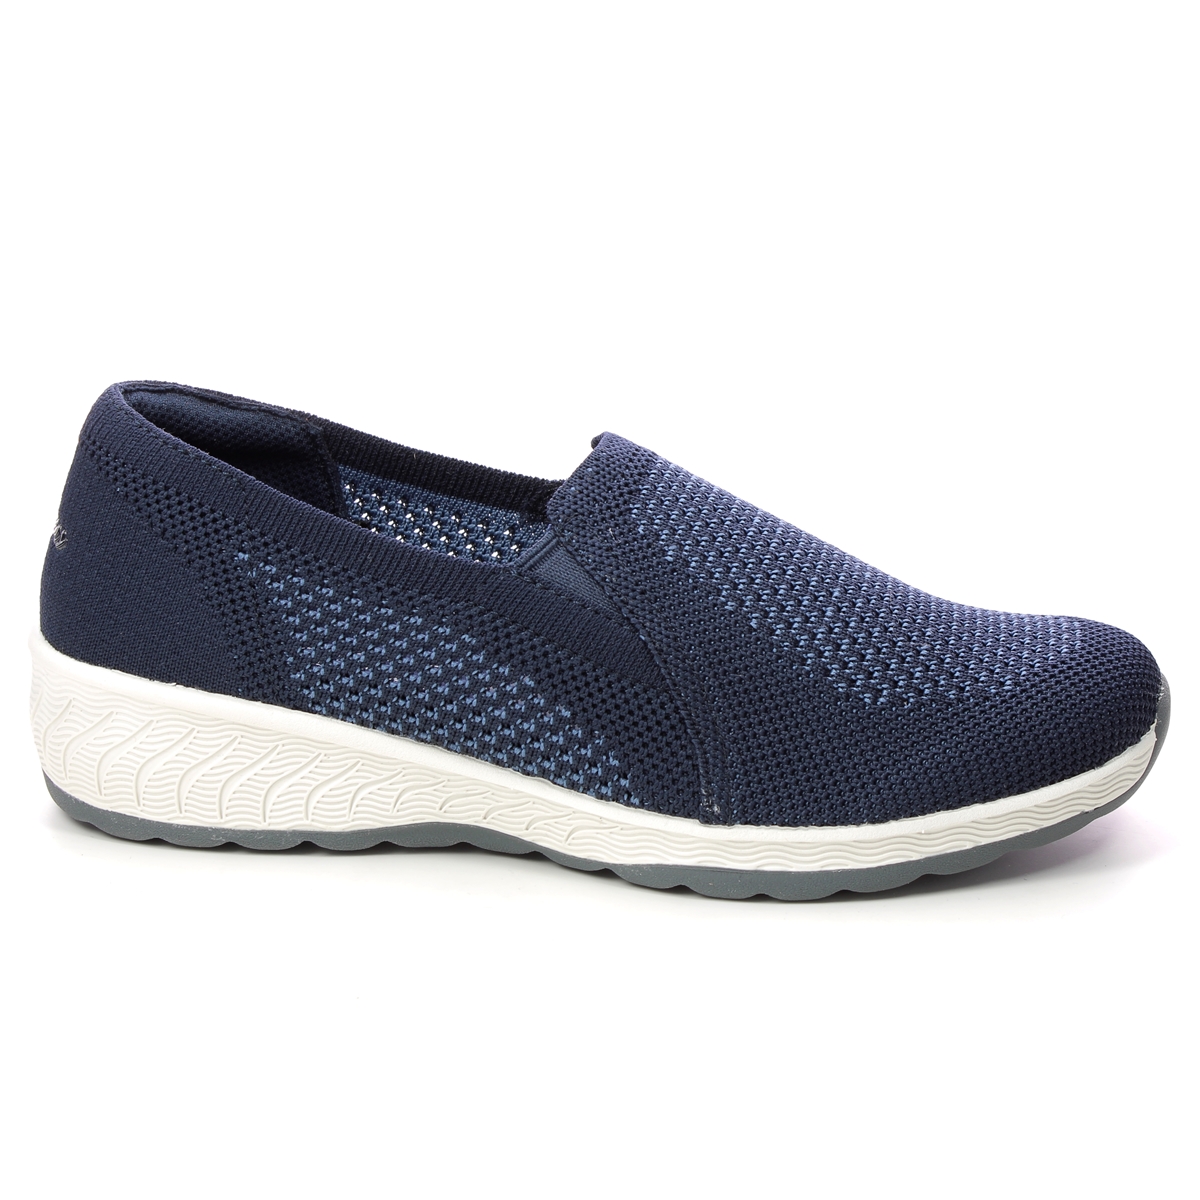 Skechers Up-lifted NVY Navy Womens Comfort Slip On Shoes 100454